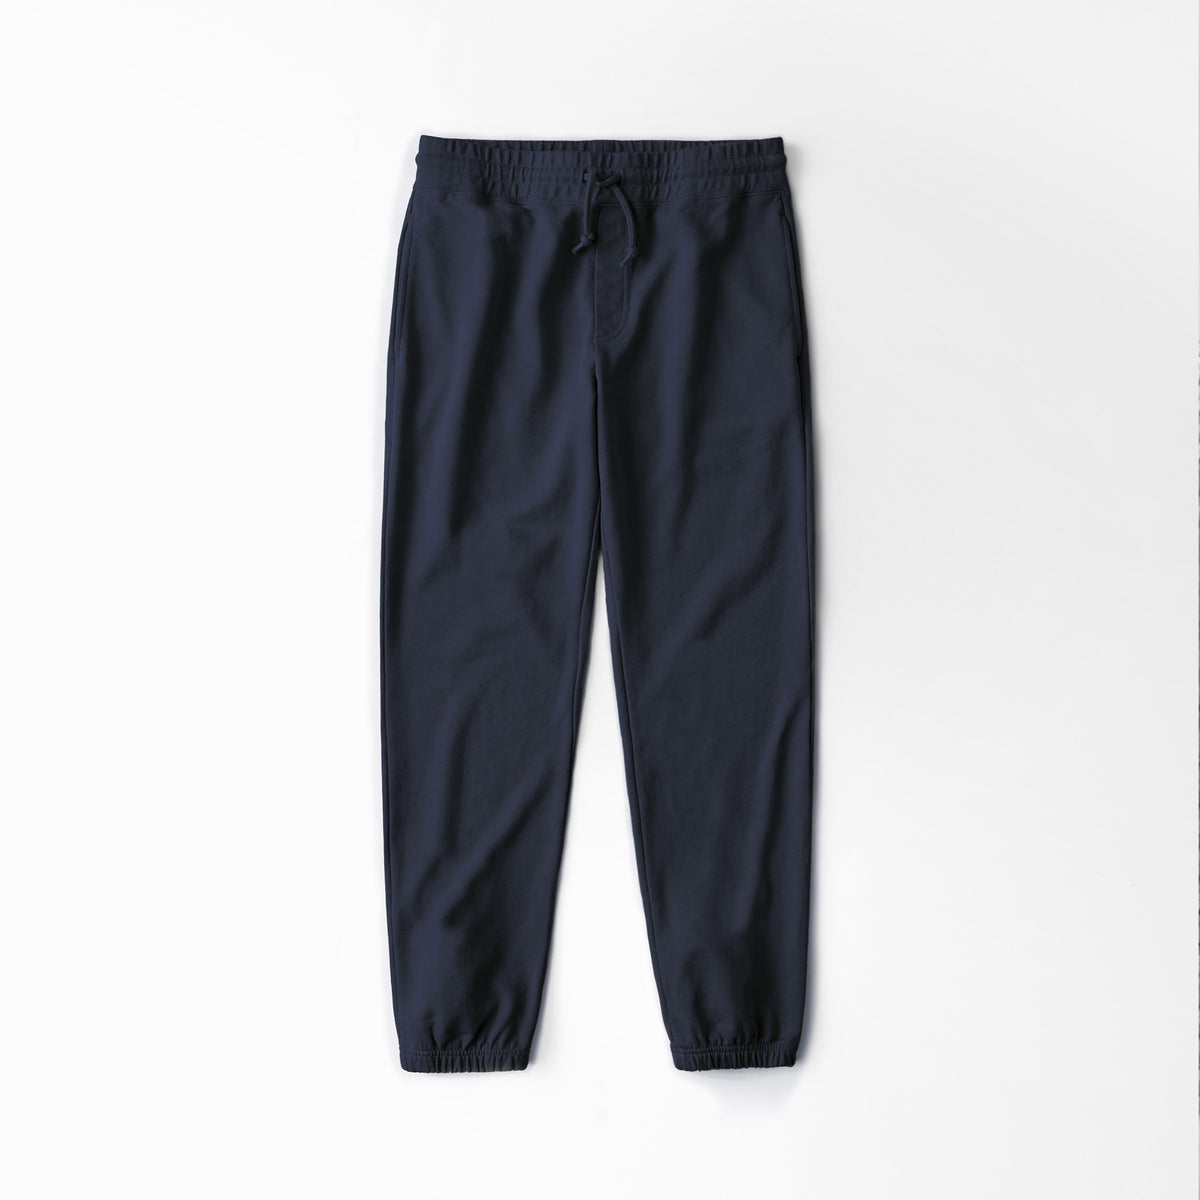 Sweatpant in Navy made from organic cotton - Unrecorded - Front Men - Front Women